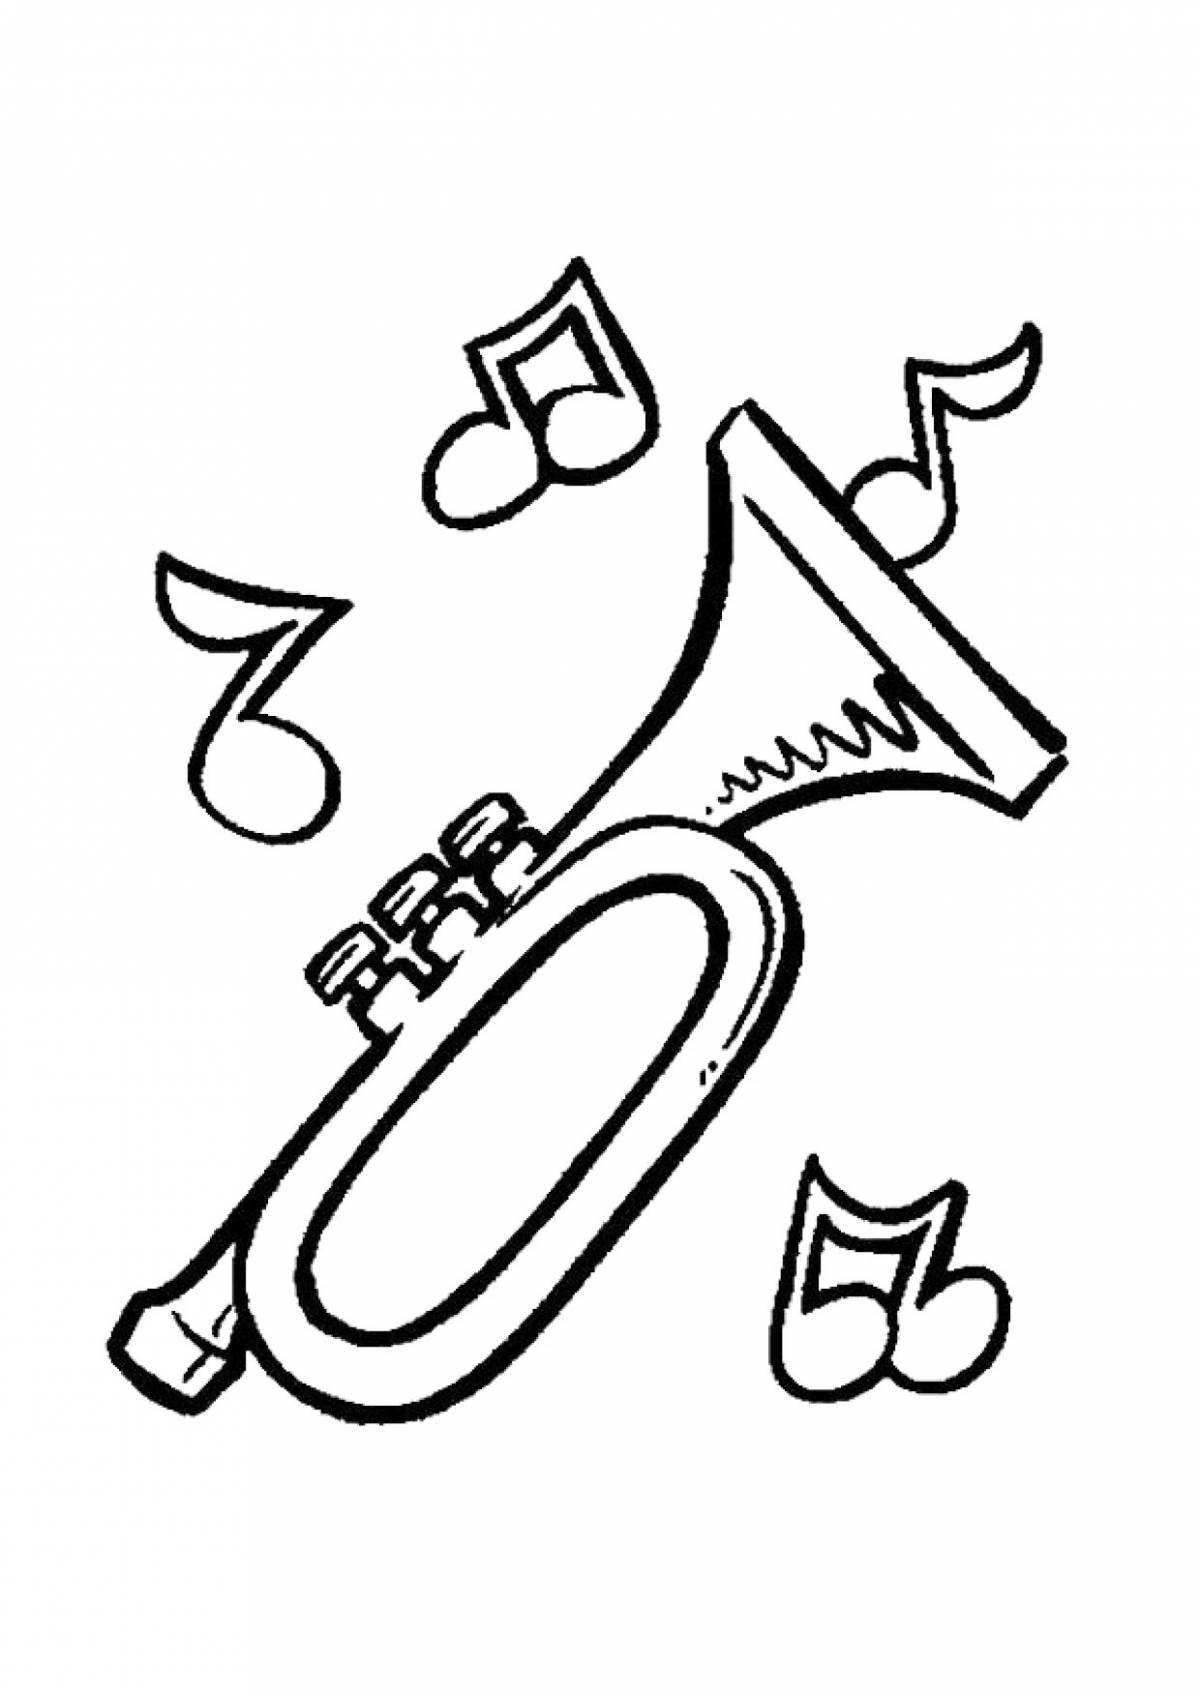 Exciting melody coloring page